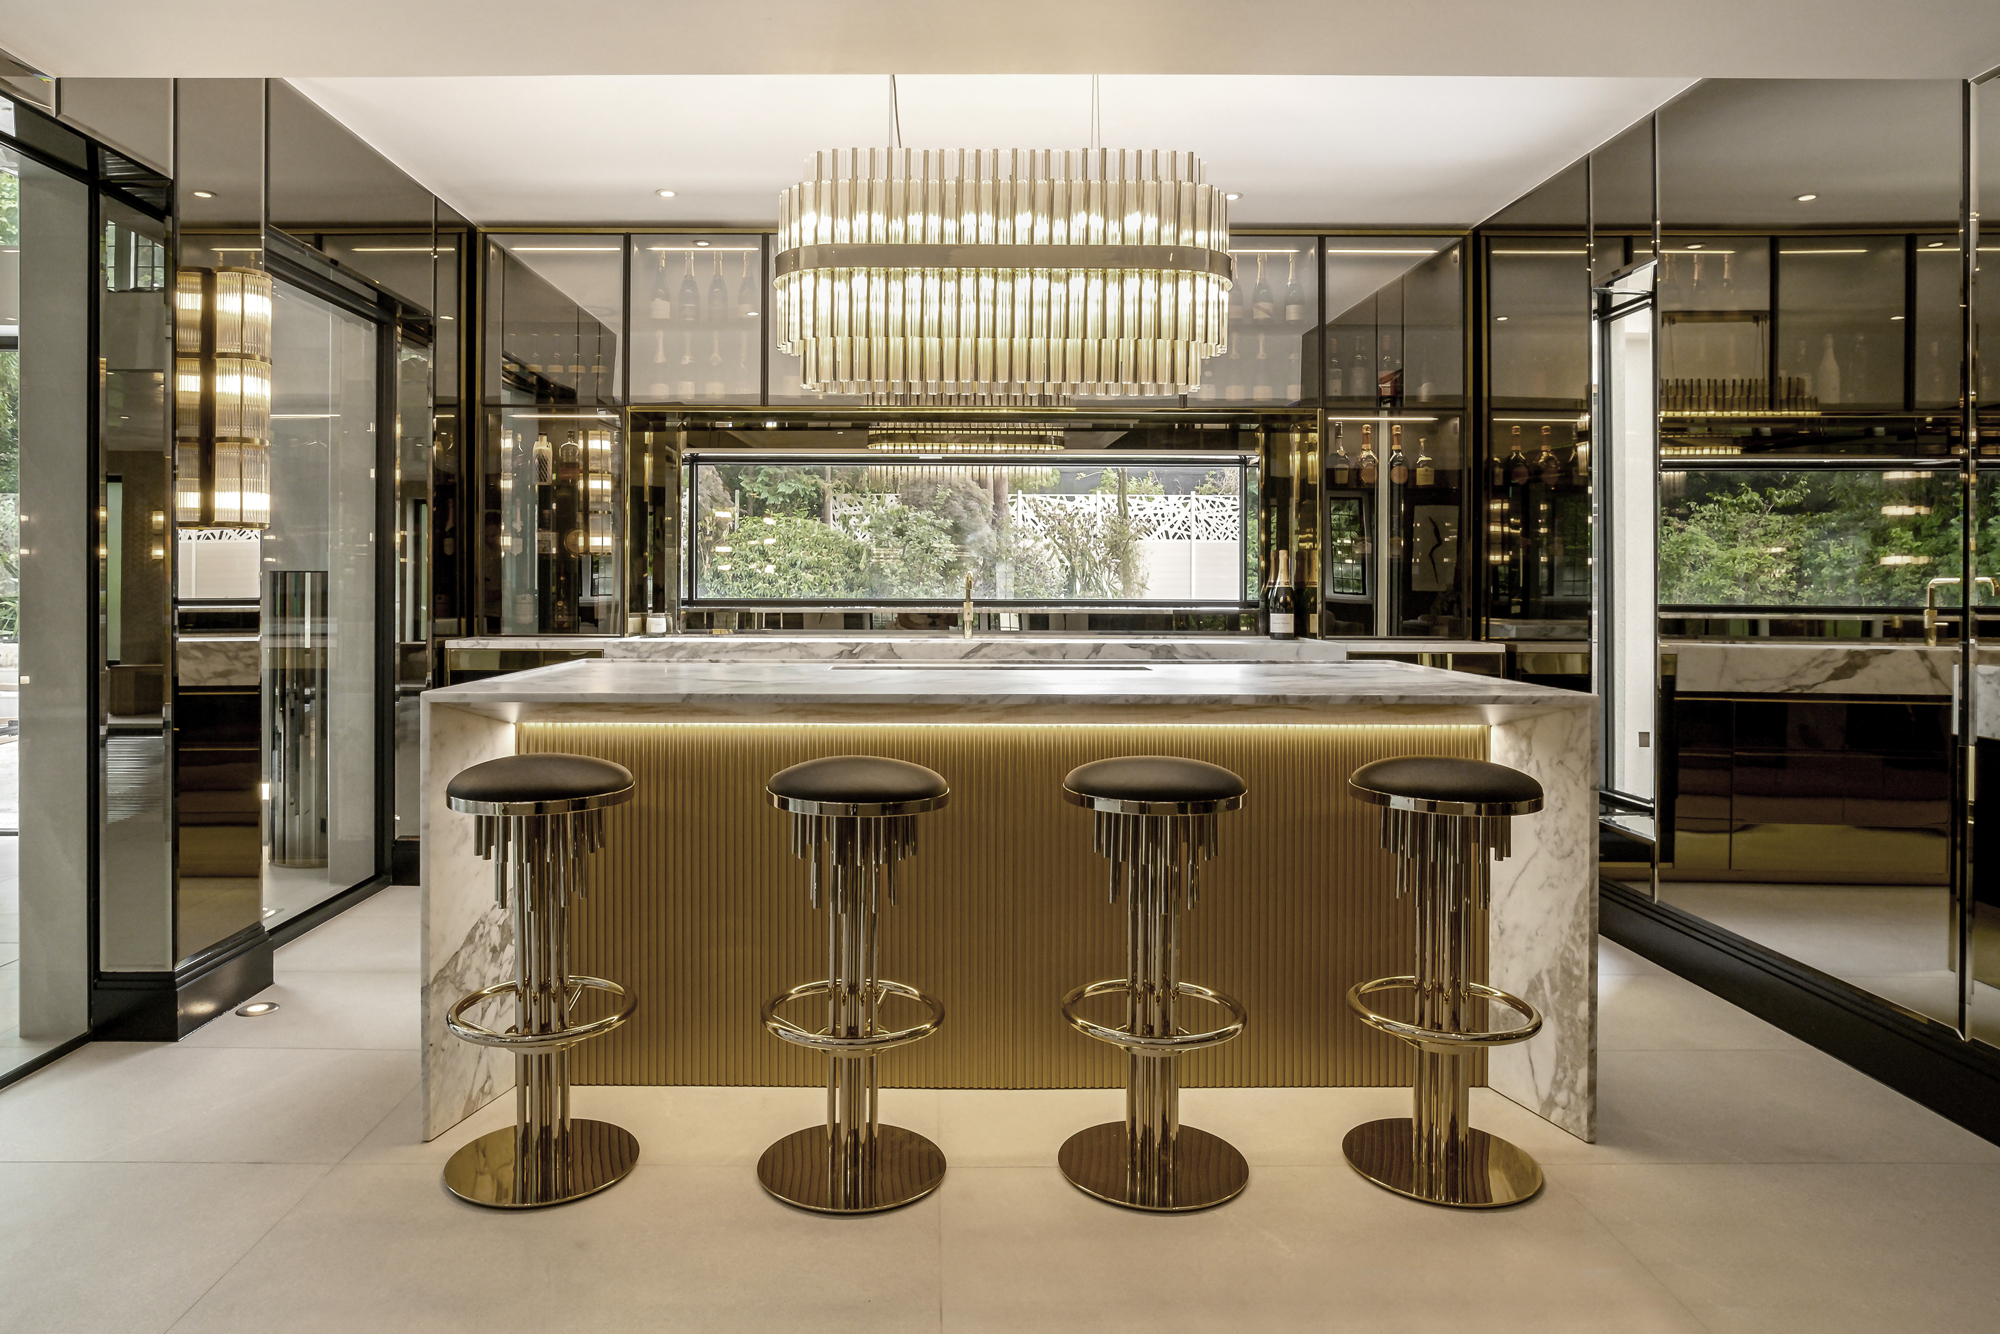 Fontana Moor Park home bar | Fontana used Italian luxury design and style to create this bar adjoining a swimming pool | Design as Art | interior architectural design studio